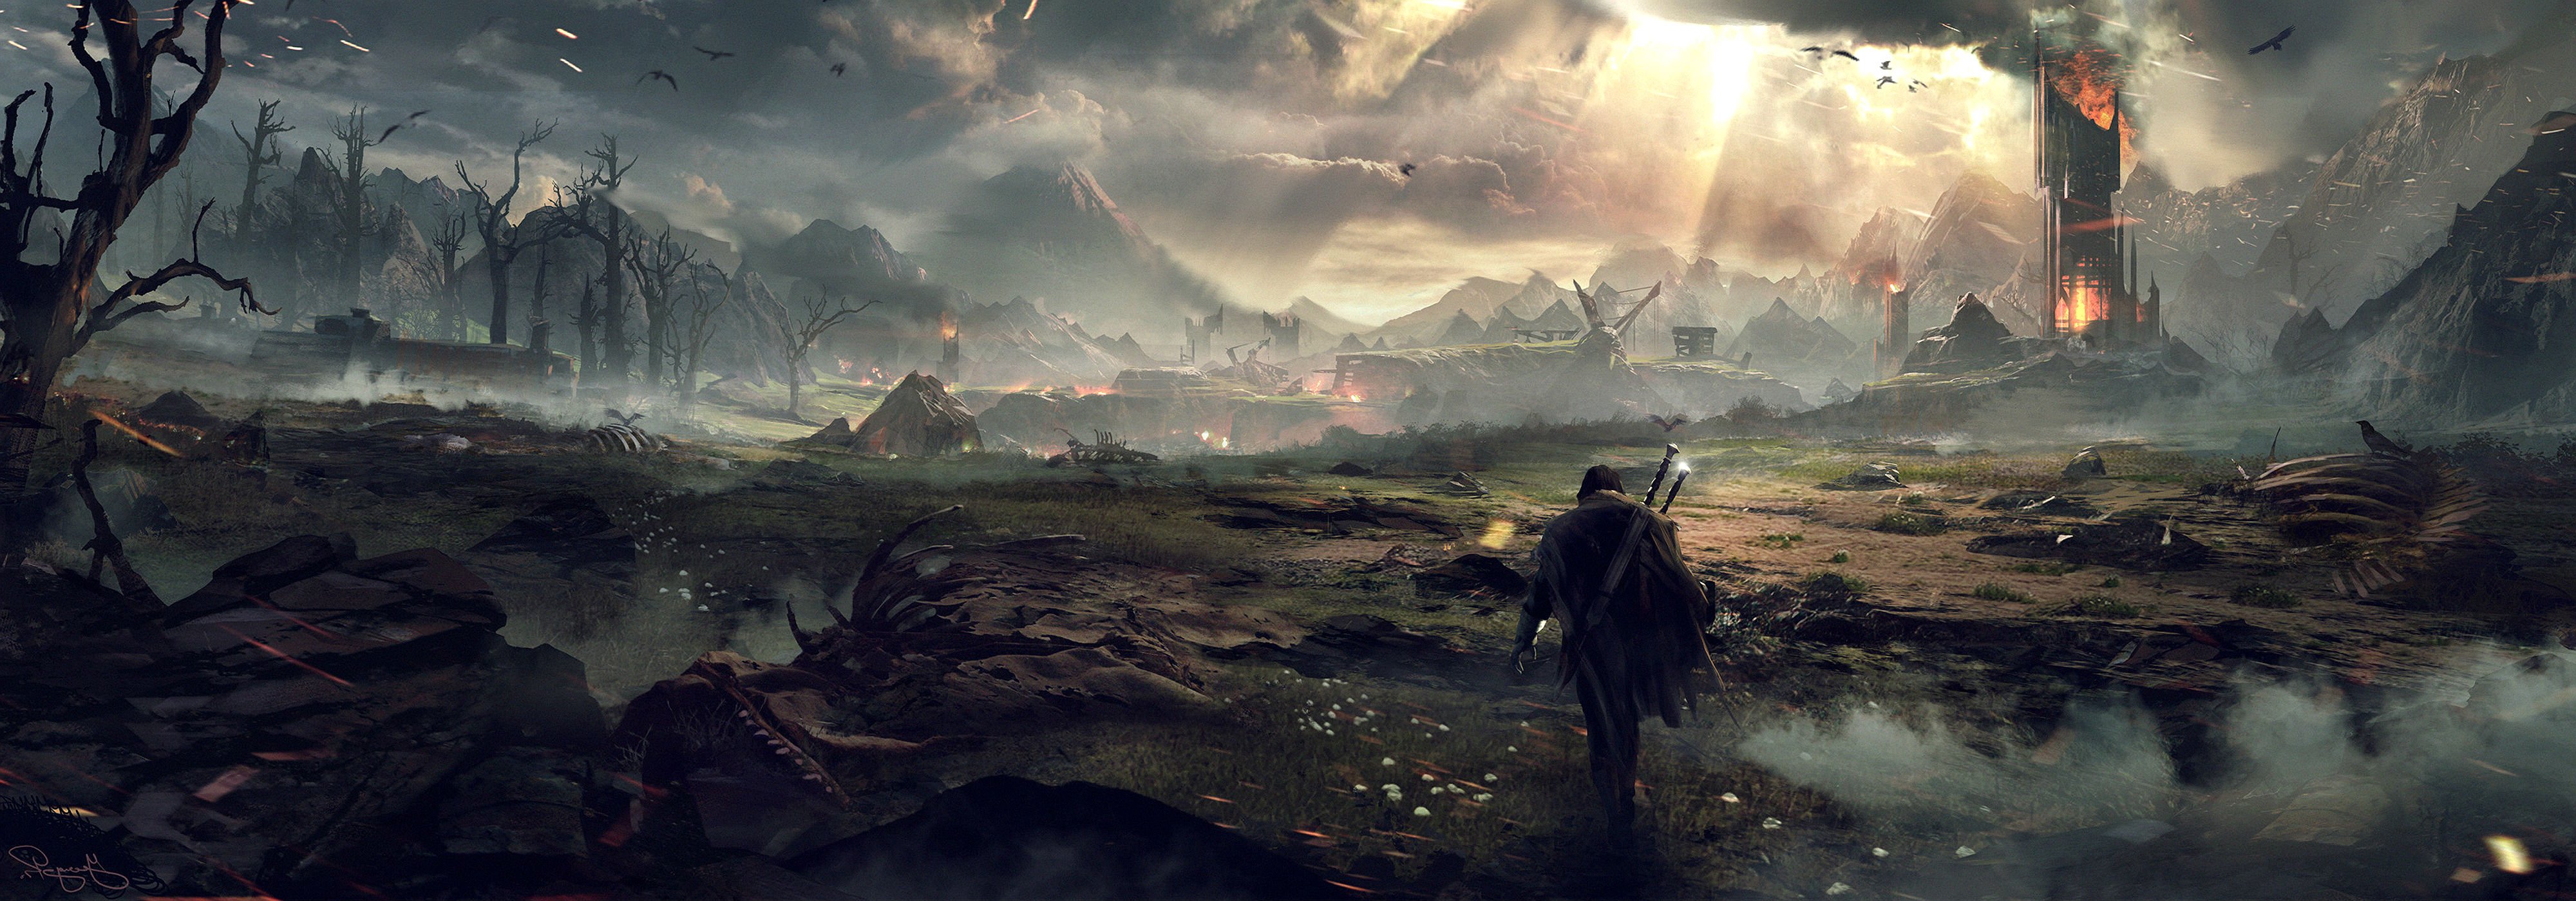 middle, Earth, Shadow, Mordor, Fantasy, Adventure, Action, Lotr, Online, Lord, Rings, Warrior Wallpaper